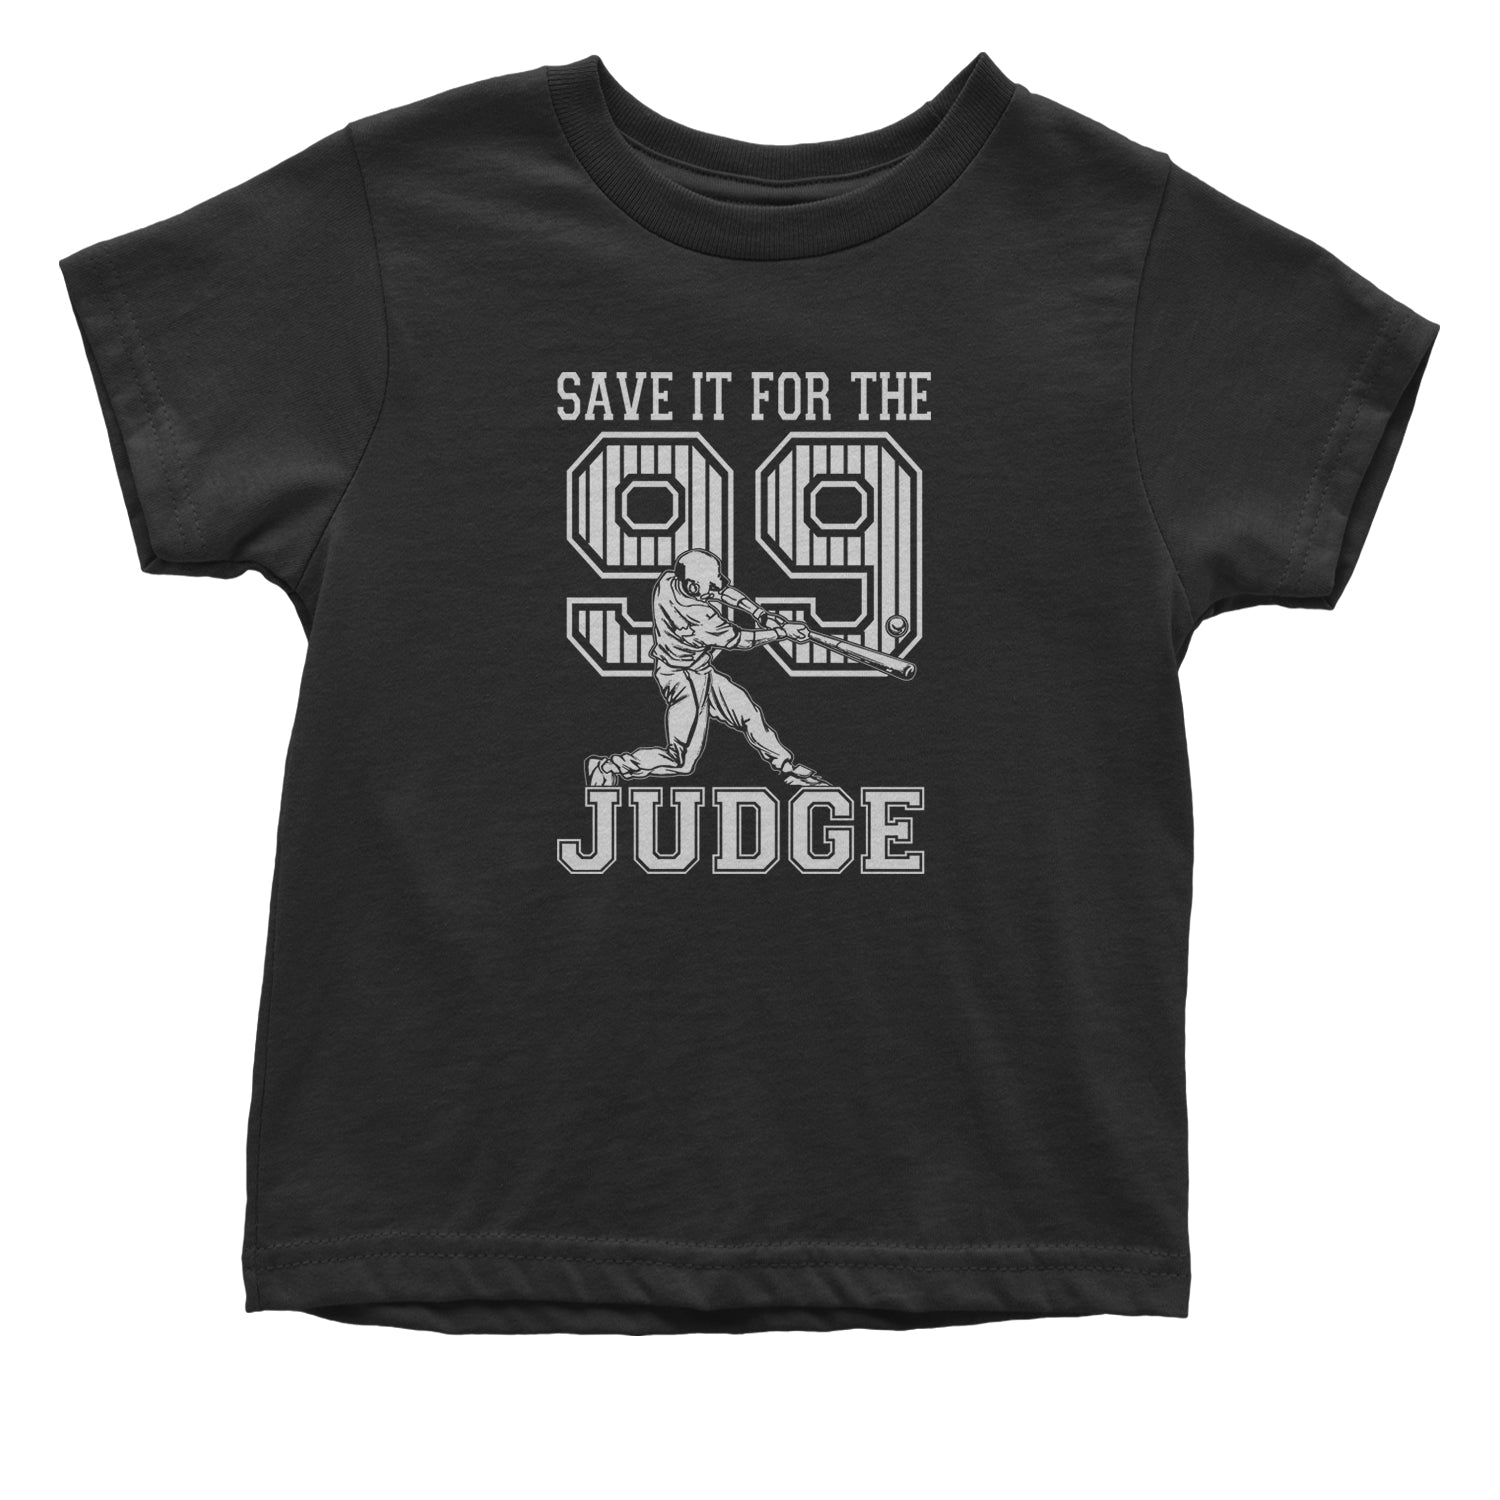 Save It For The Judge 99 Infant One-Piece Romper Bodysuit and Toddler T-shirt 99, aaron, all, for, judge, new, number, rise, the, yankees, york by Expression Tees